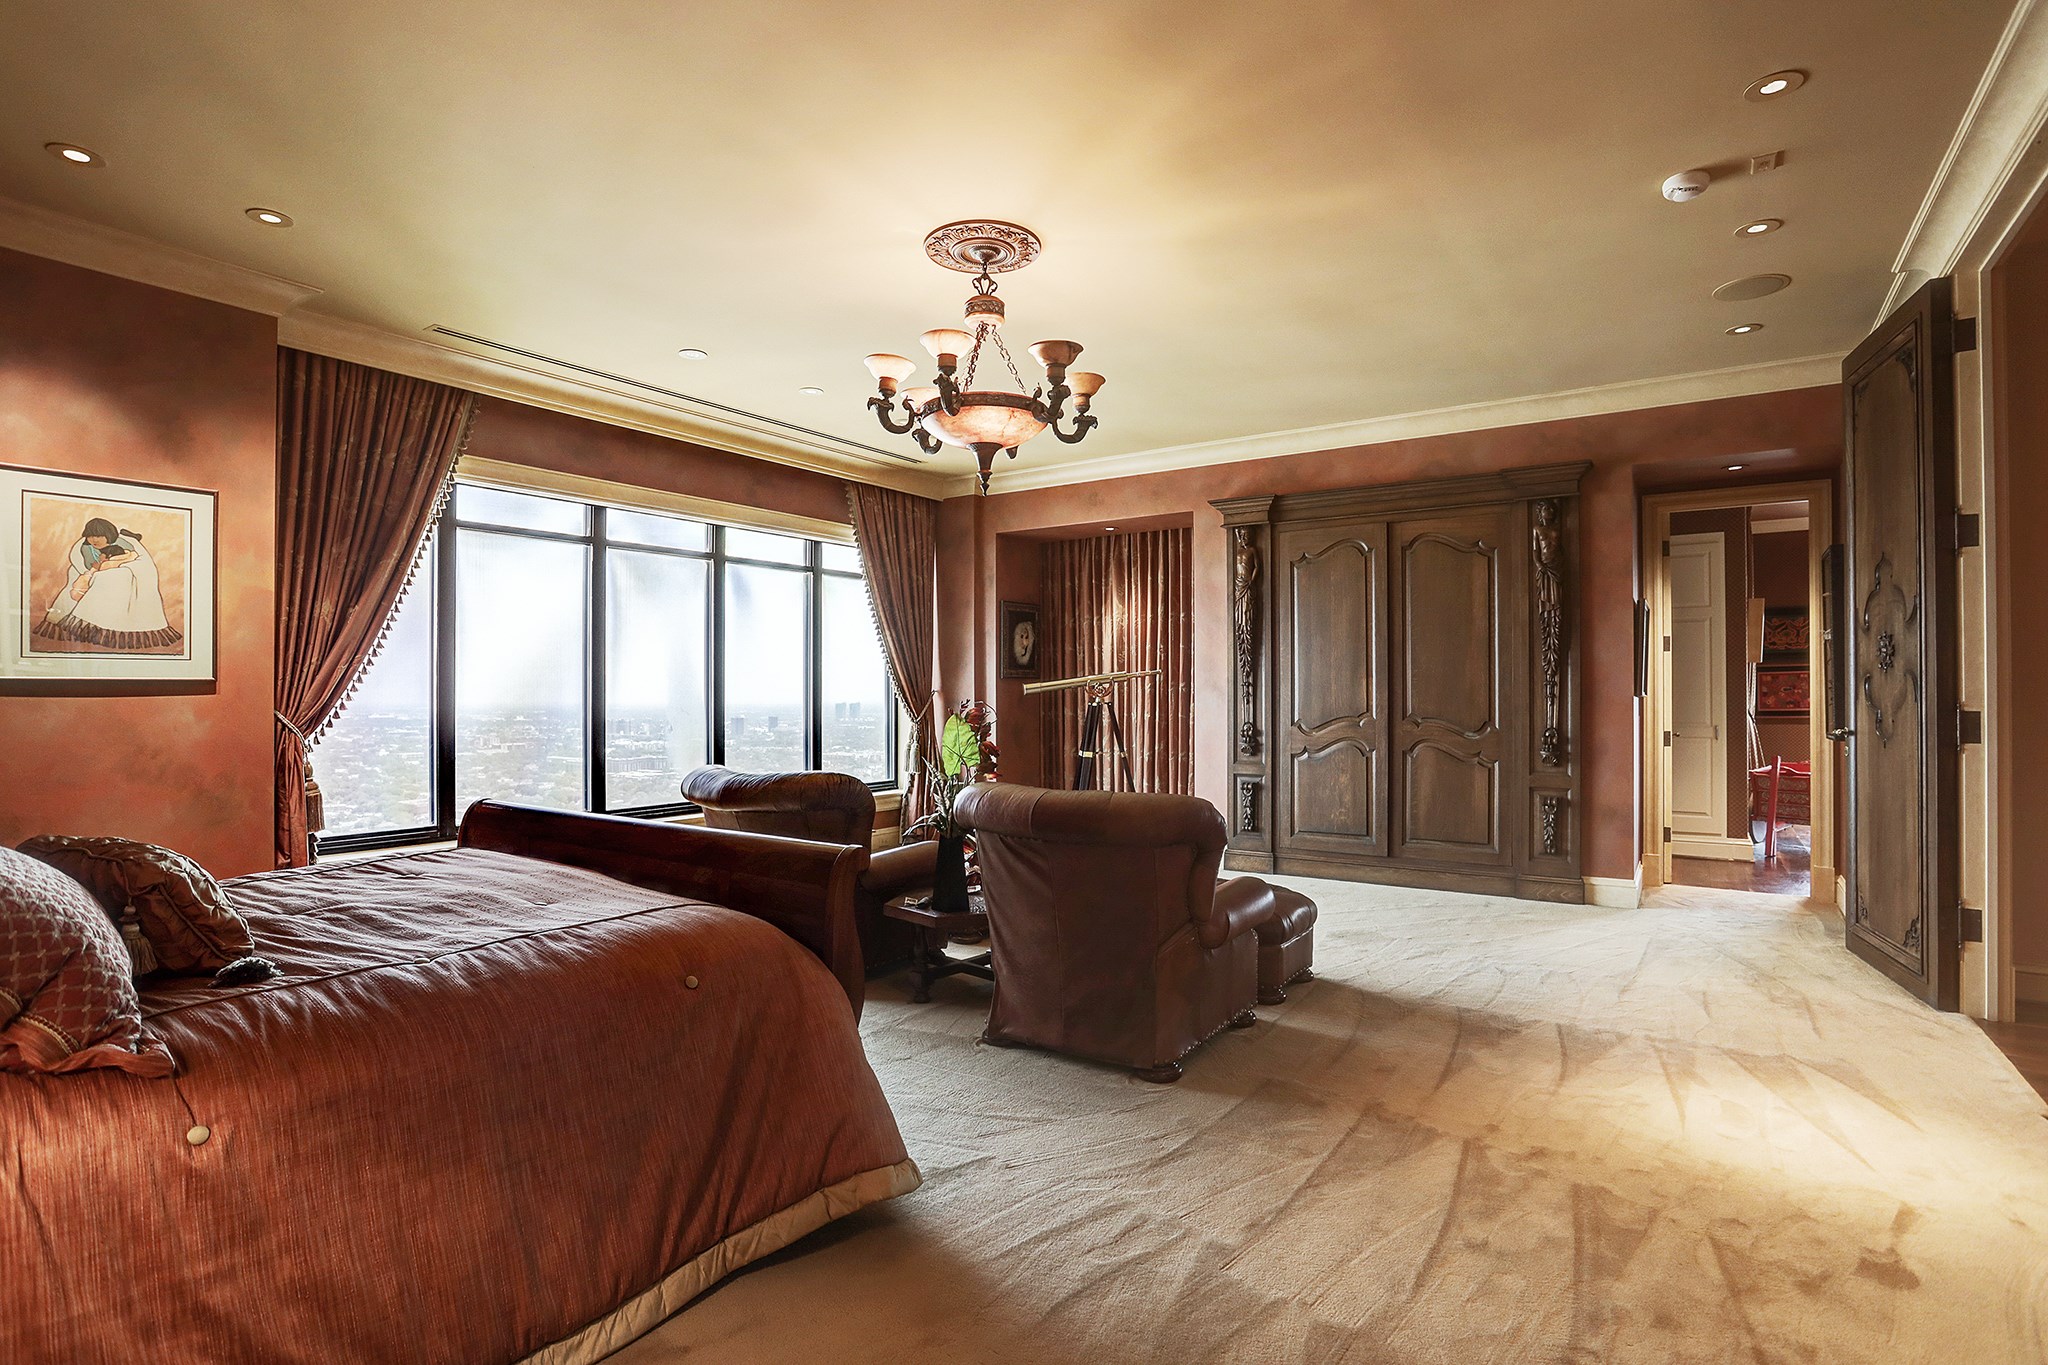 The Primary Bedroom with sitting area has faux Venetian plaster walls, access to the second balcony, entertainment center behind the oversized carved cabinet doors and outstanding views.